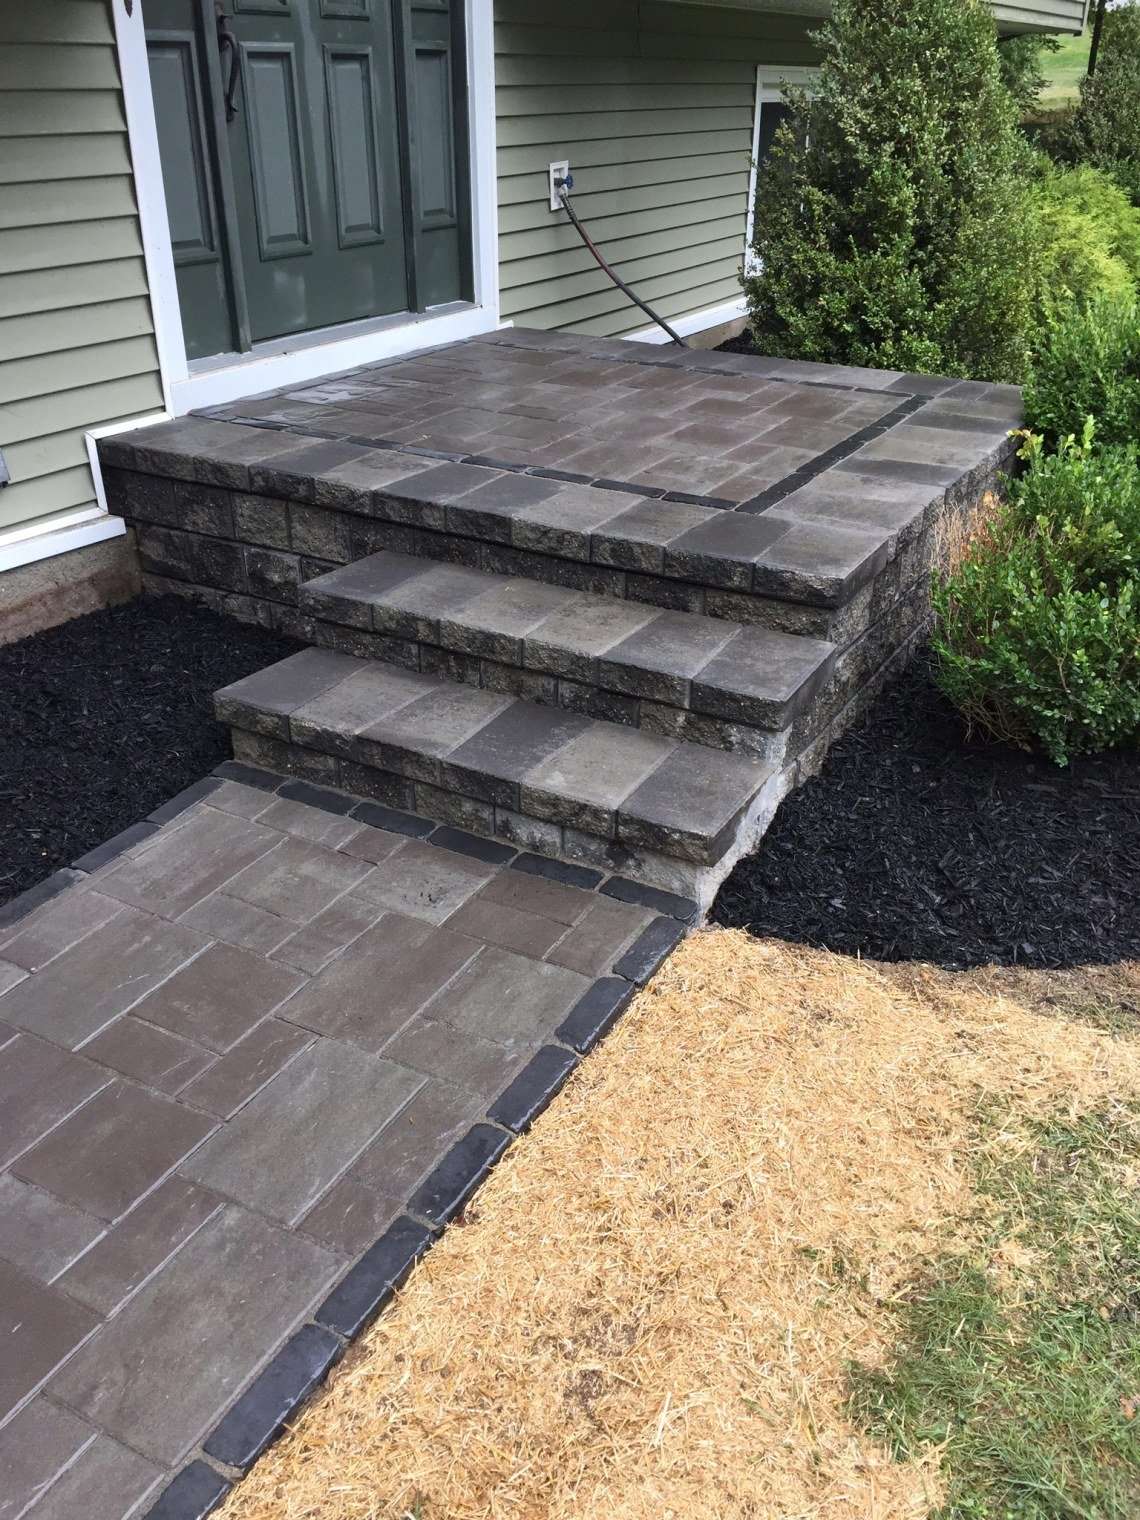 â¥3 Simplest Steps On : How to Build Paver Steps to Patio ...